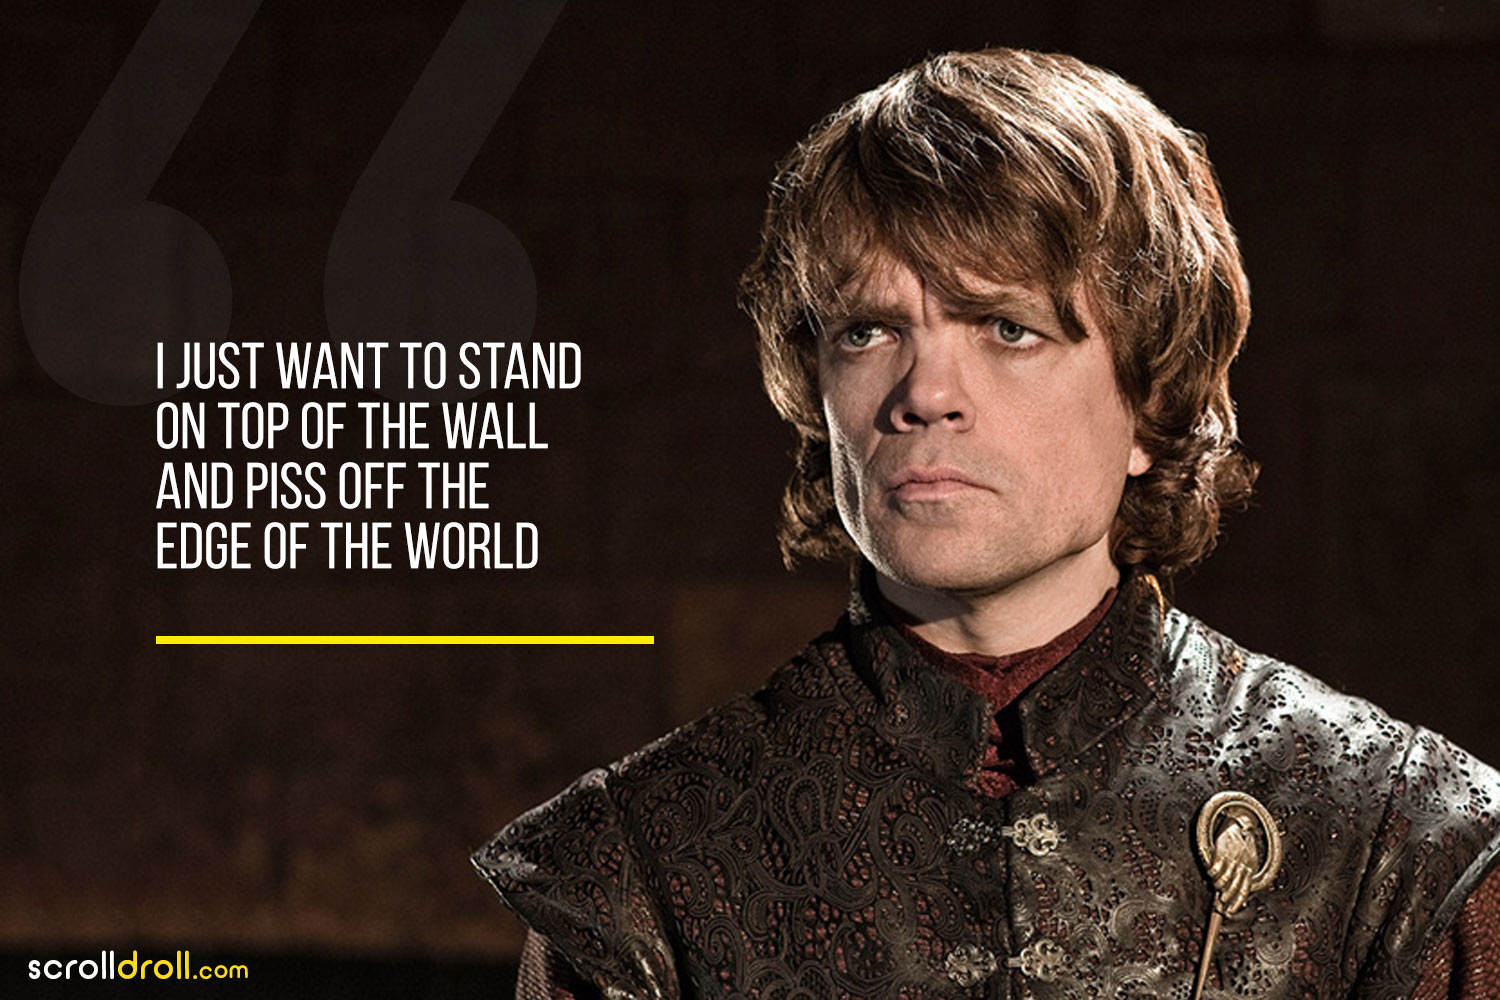 tyrion lannister quotes season 6